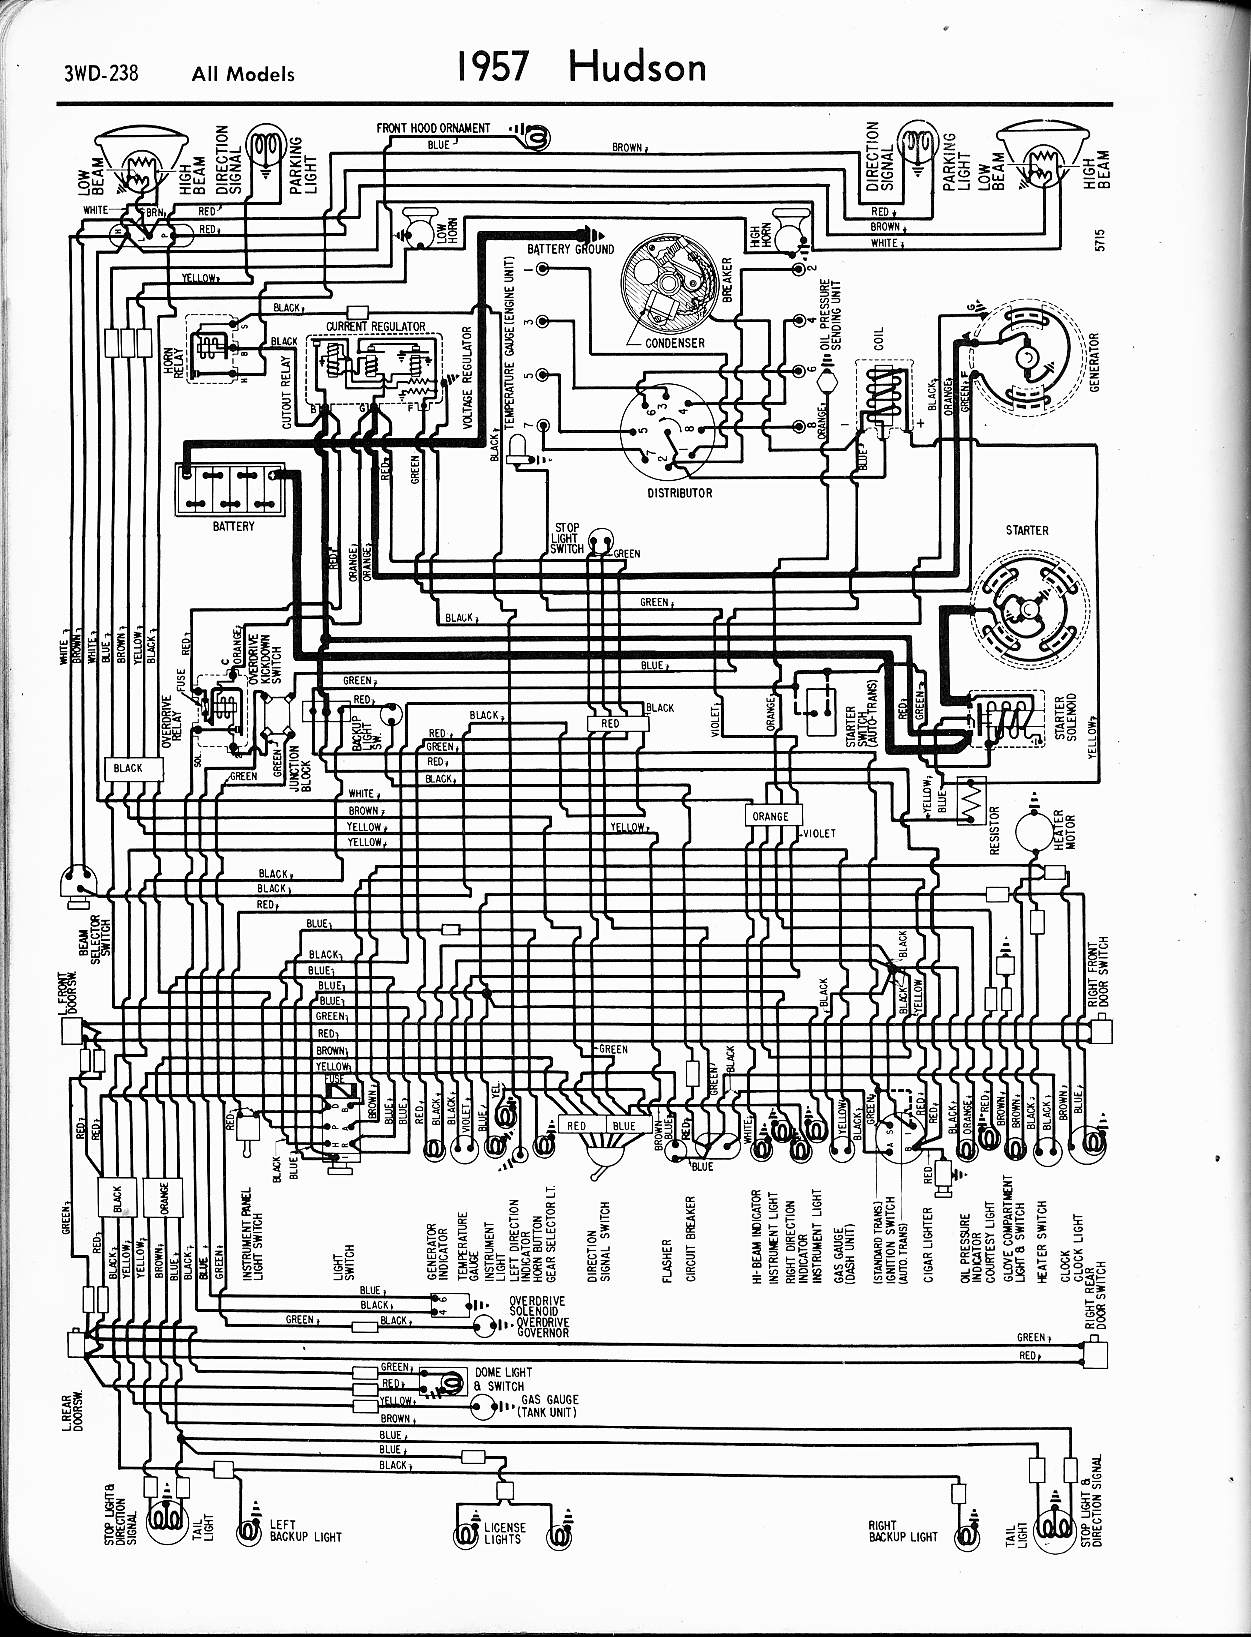 1965 Chevy C10 Wiring Diagram submited images.